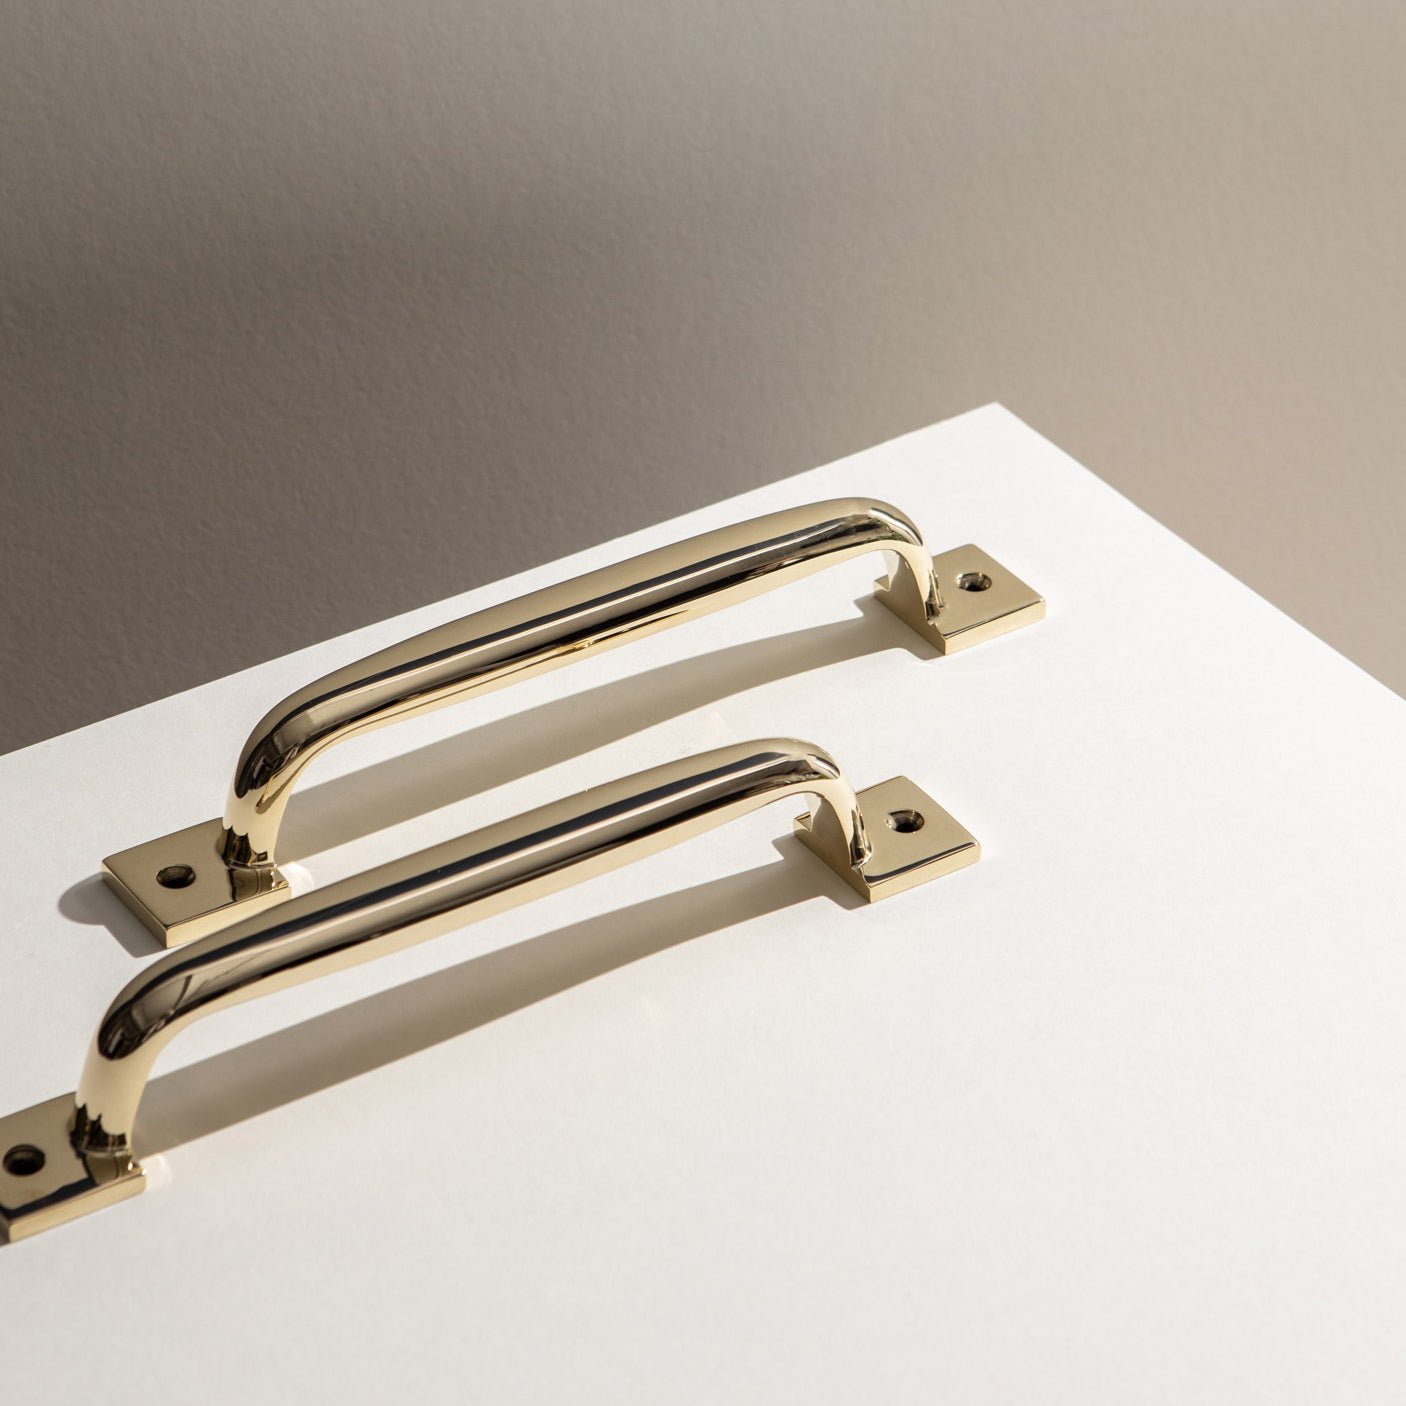 Polished Brass Unlacquered : Finish in Focus, Armac Martin